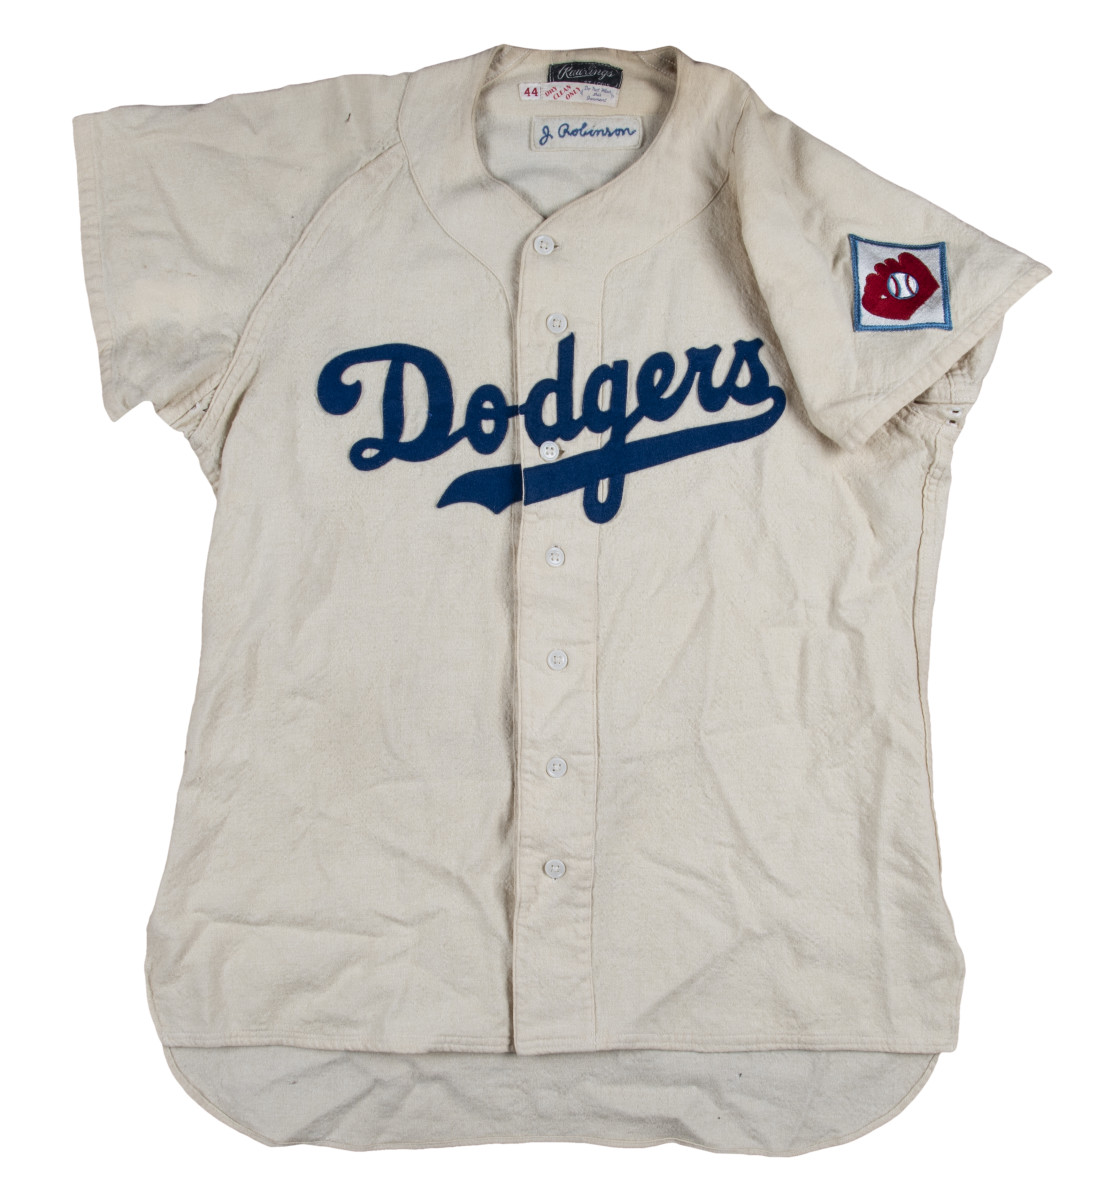 jackie robinson jersey old